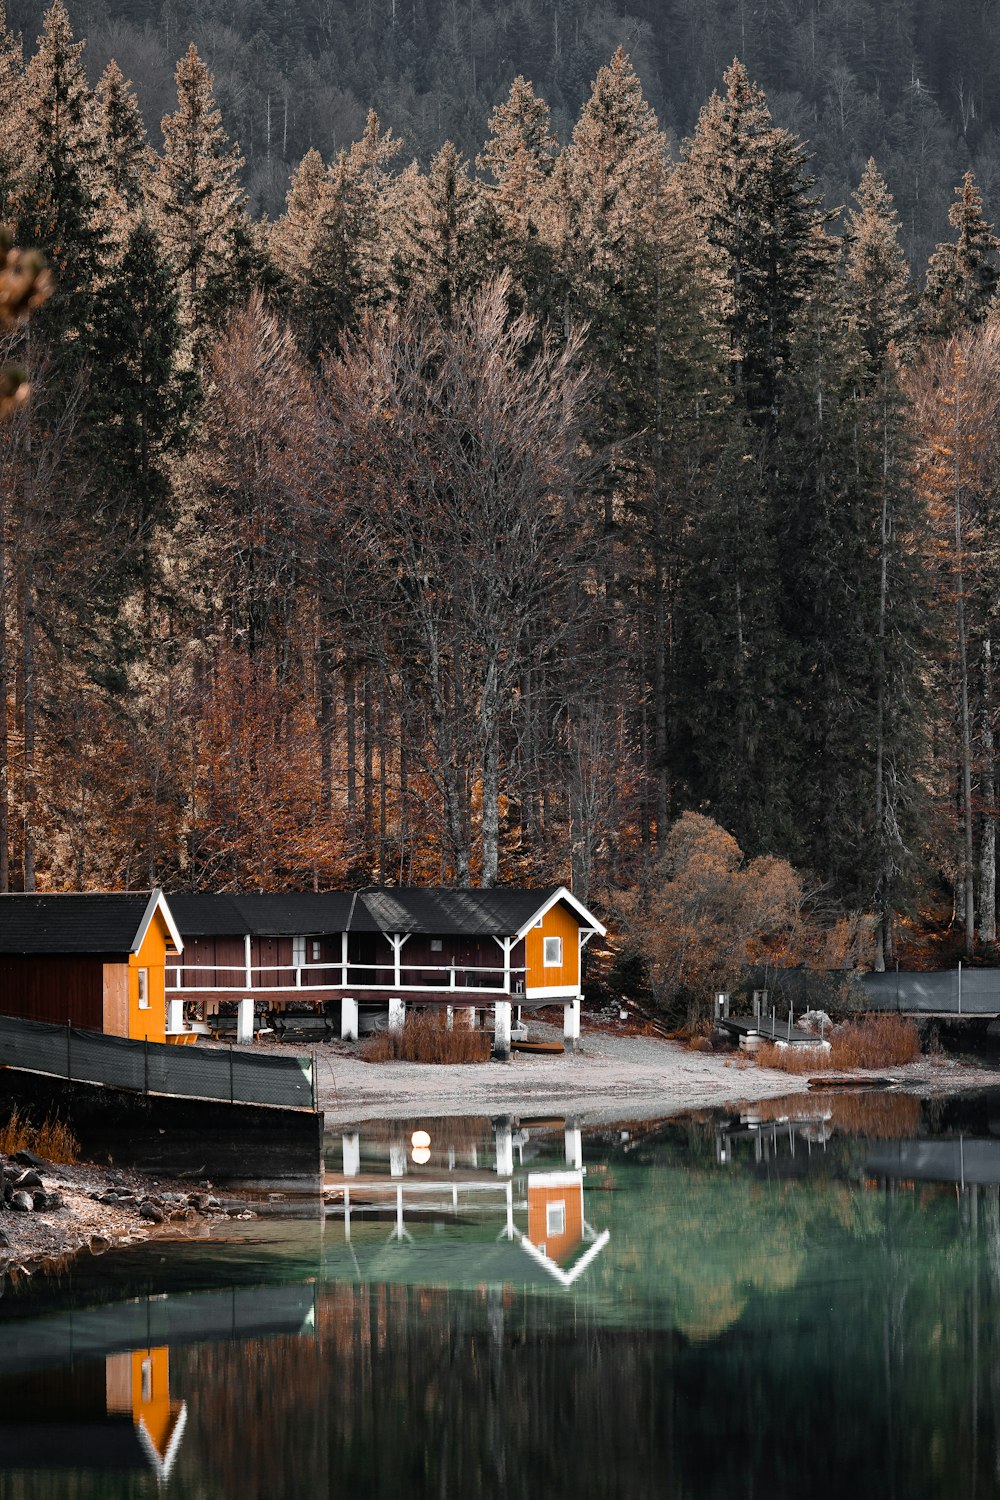 a house on a dock by a lake with trees in the background